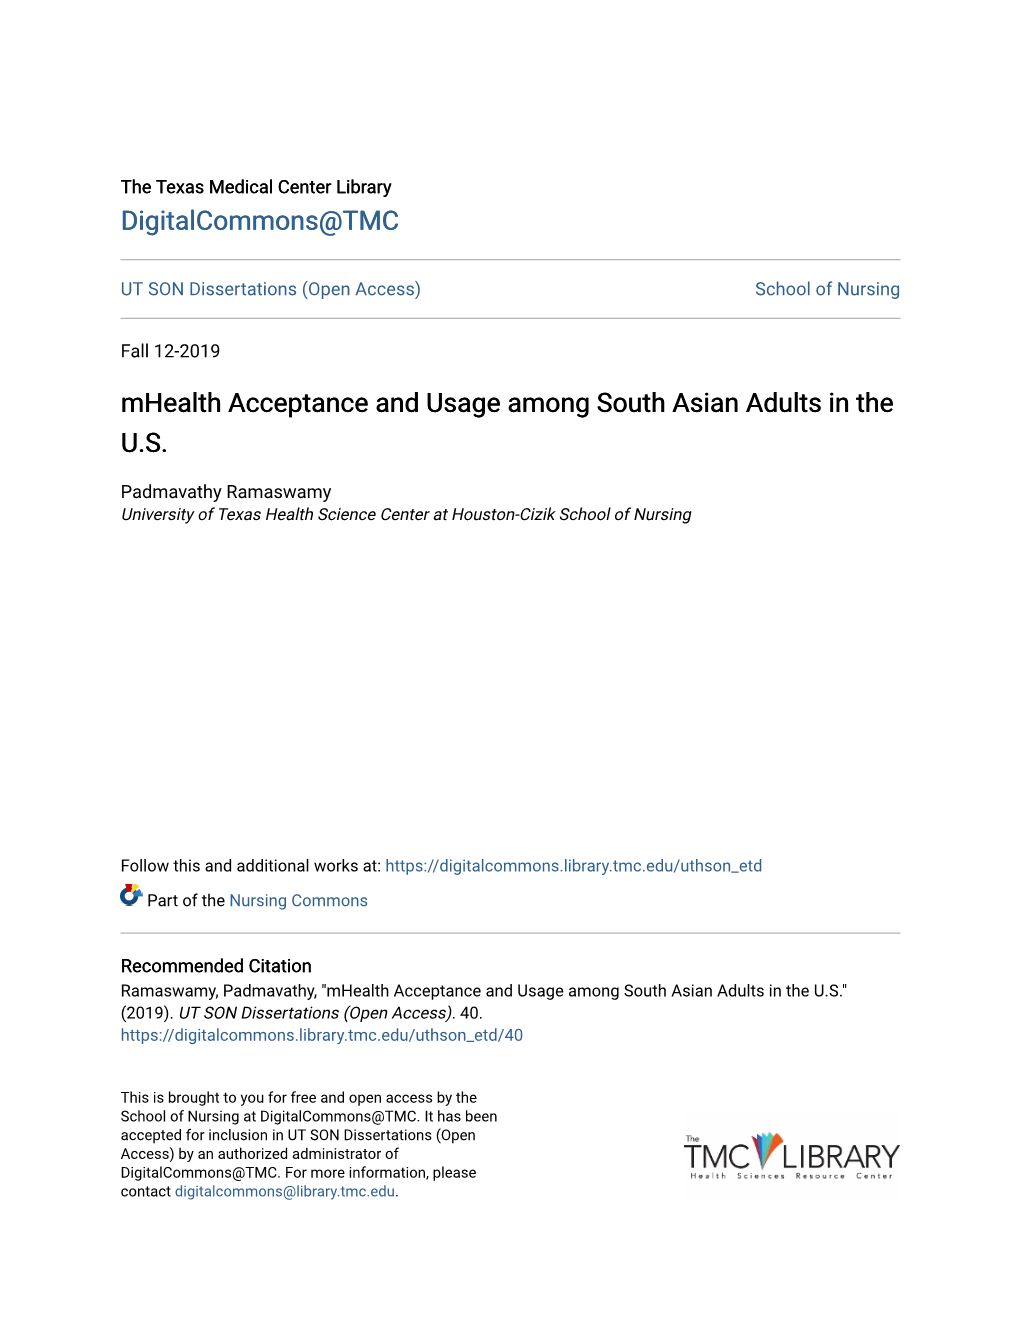 Mhealth Acceptance and Usage Among South Asian Adults in the U.S